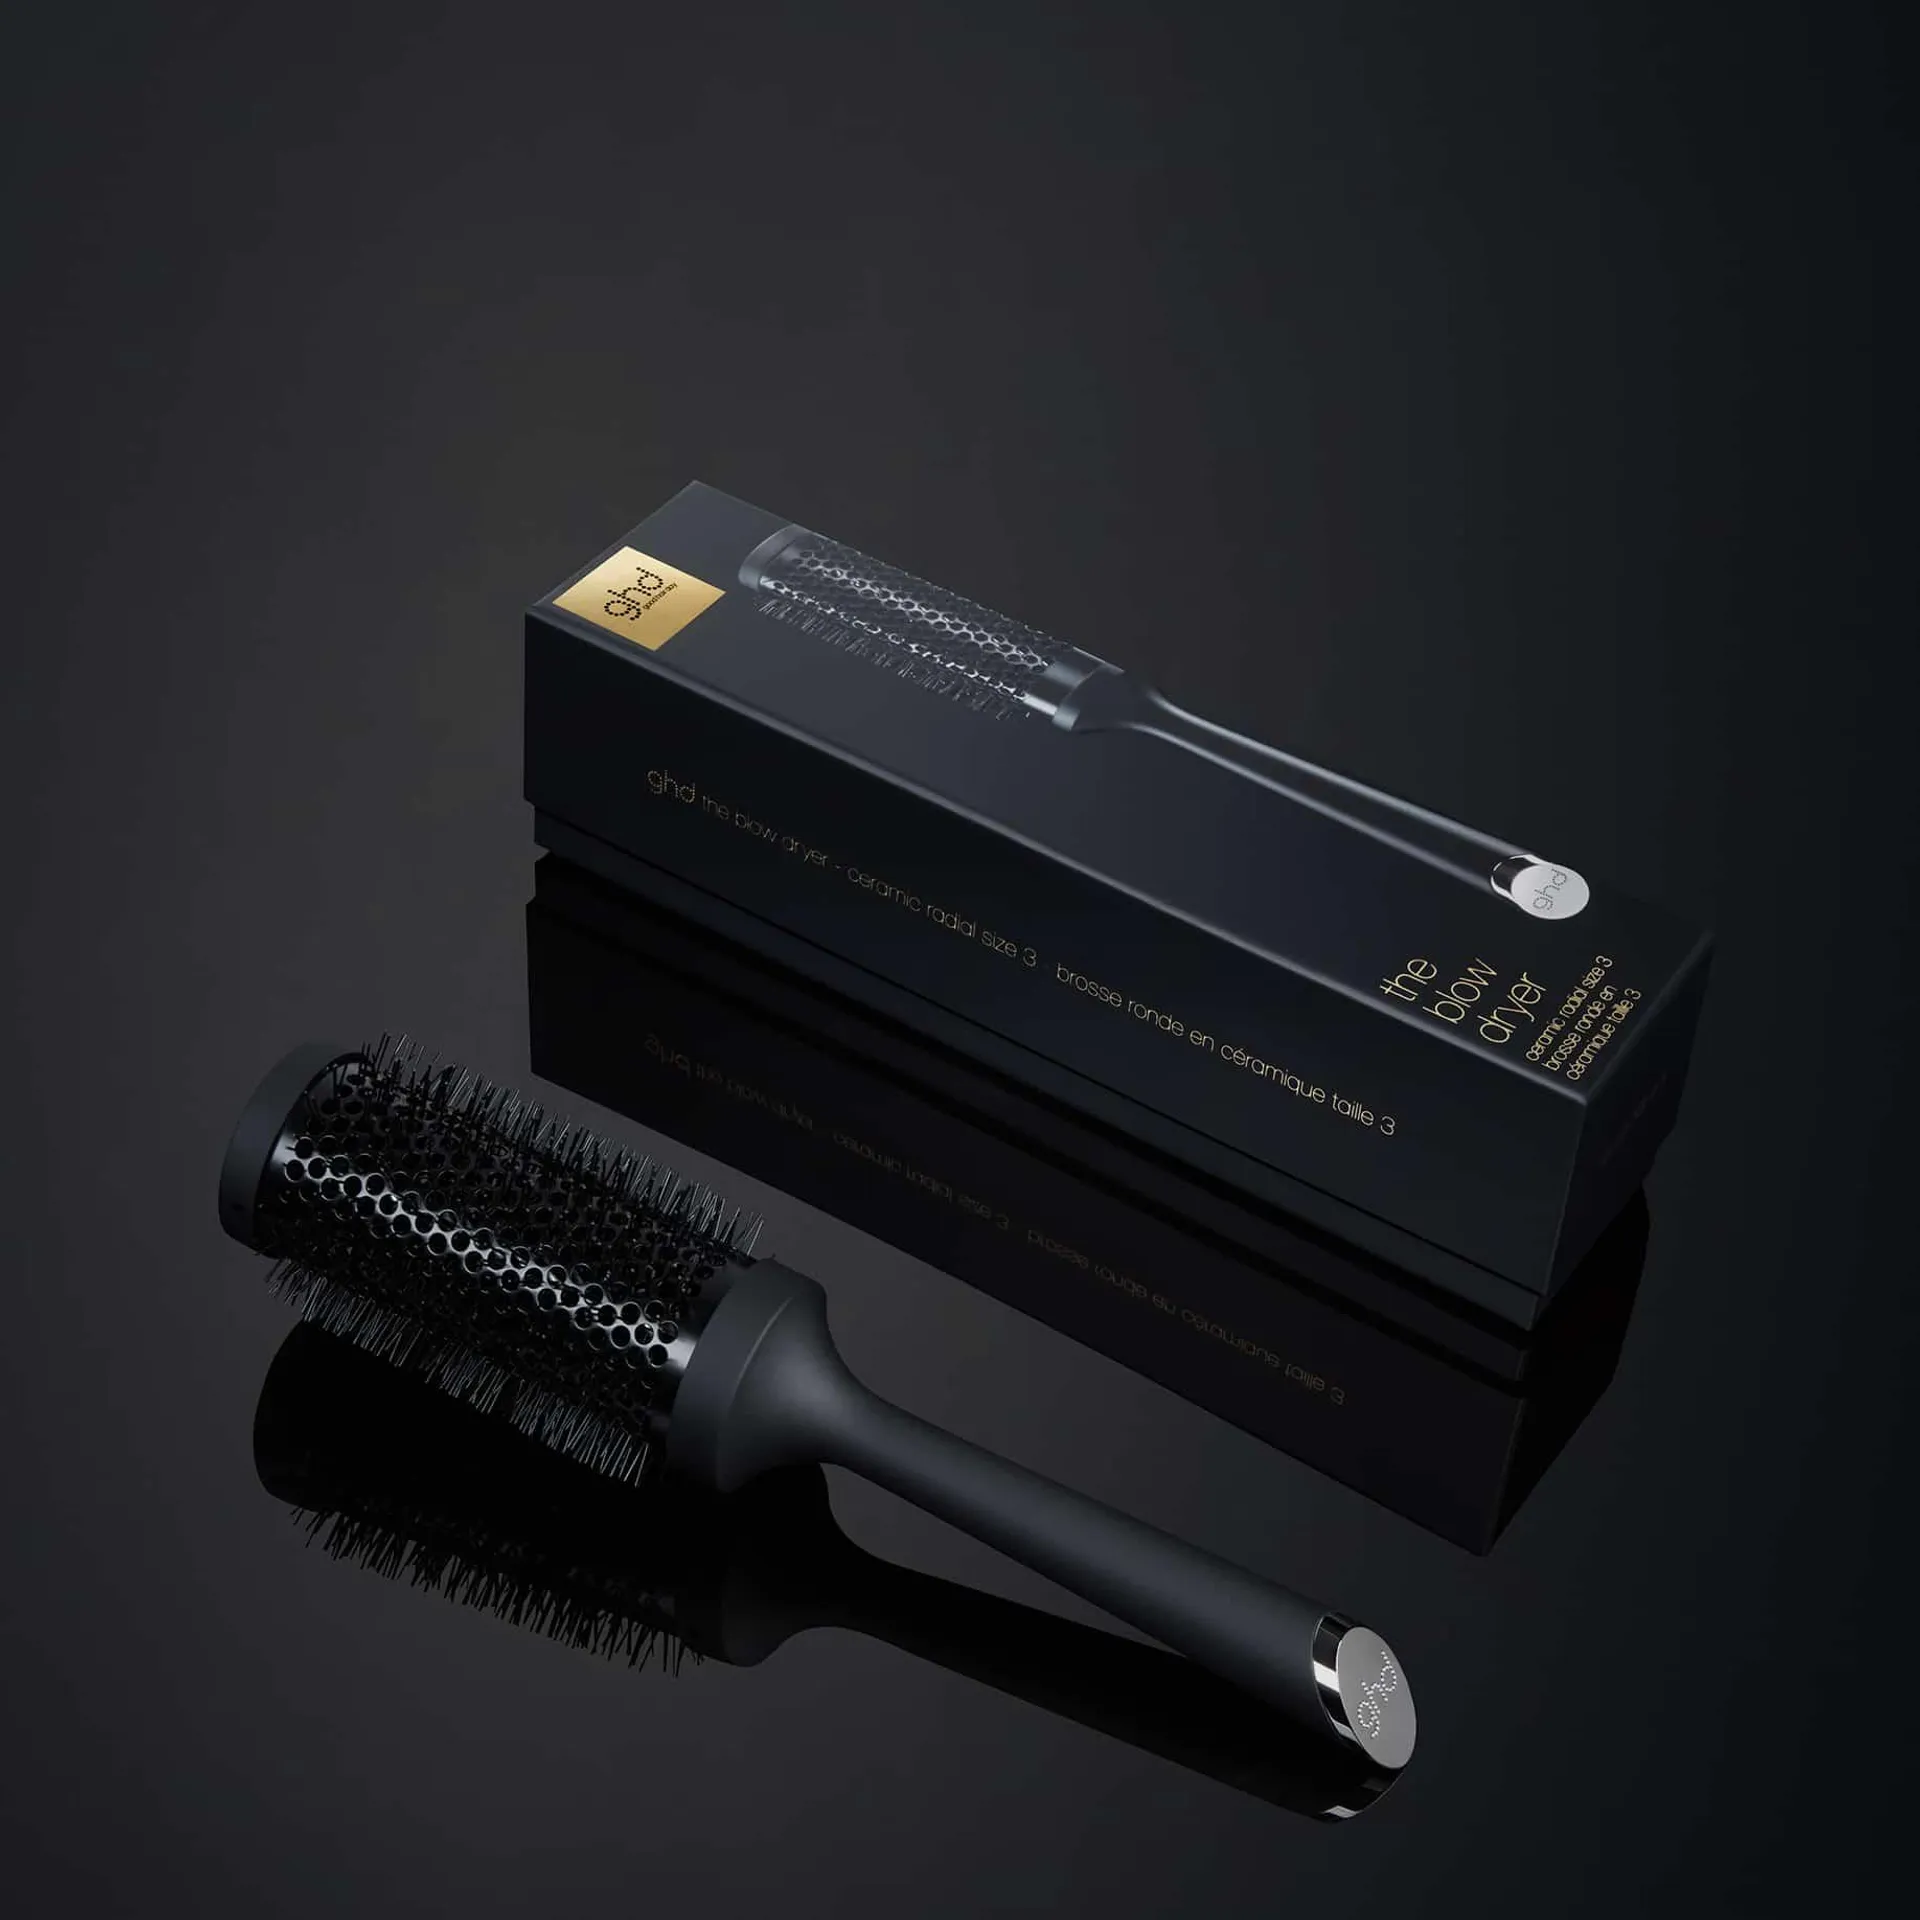 GHD THE BLOW DRYER - RADIAL BRUSH SIZE 3 (45MM BARREL)